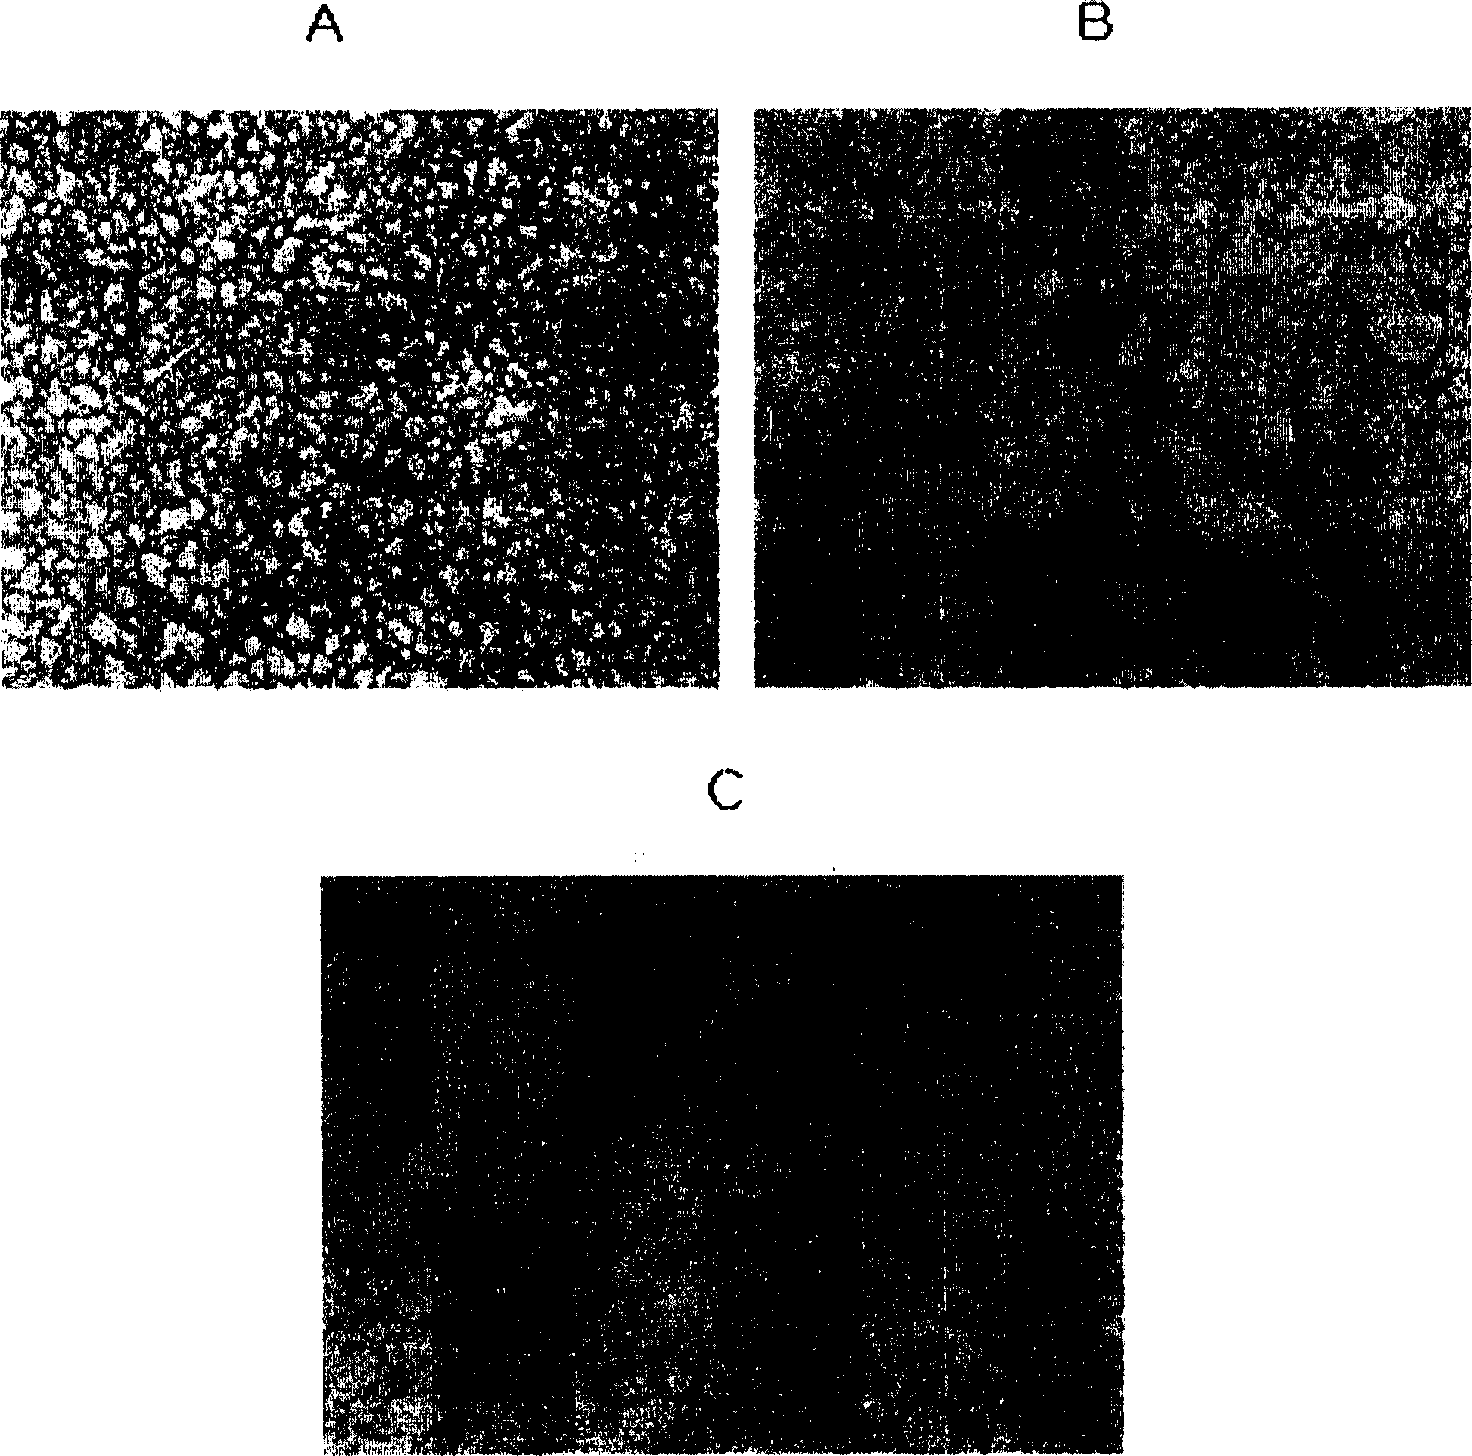 Composition for preventing or treating allergic disease using black rice extract and its therapeutic use